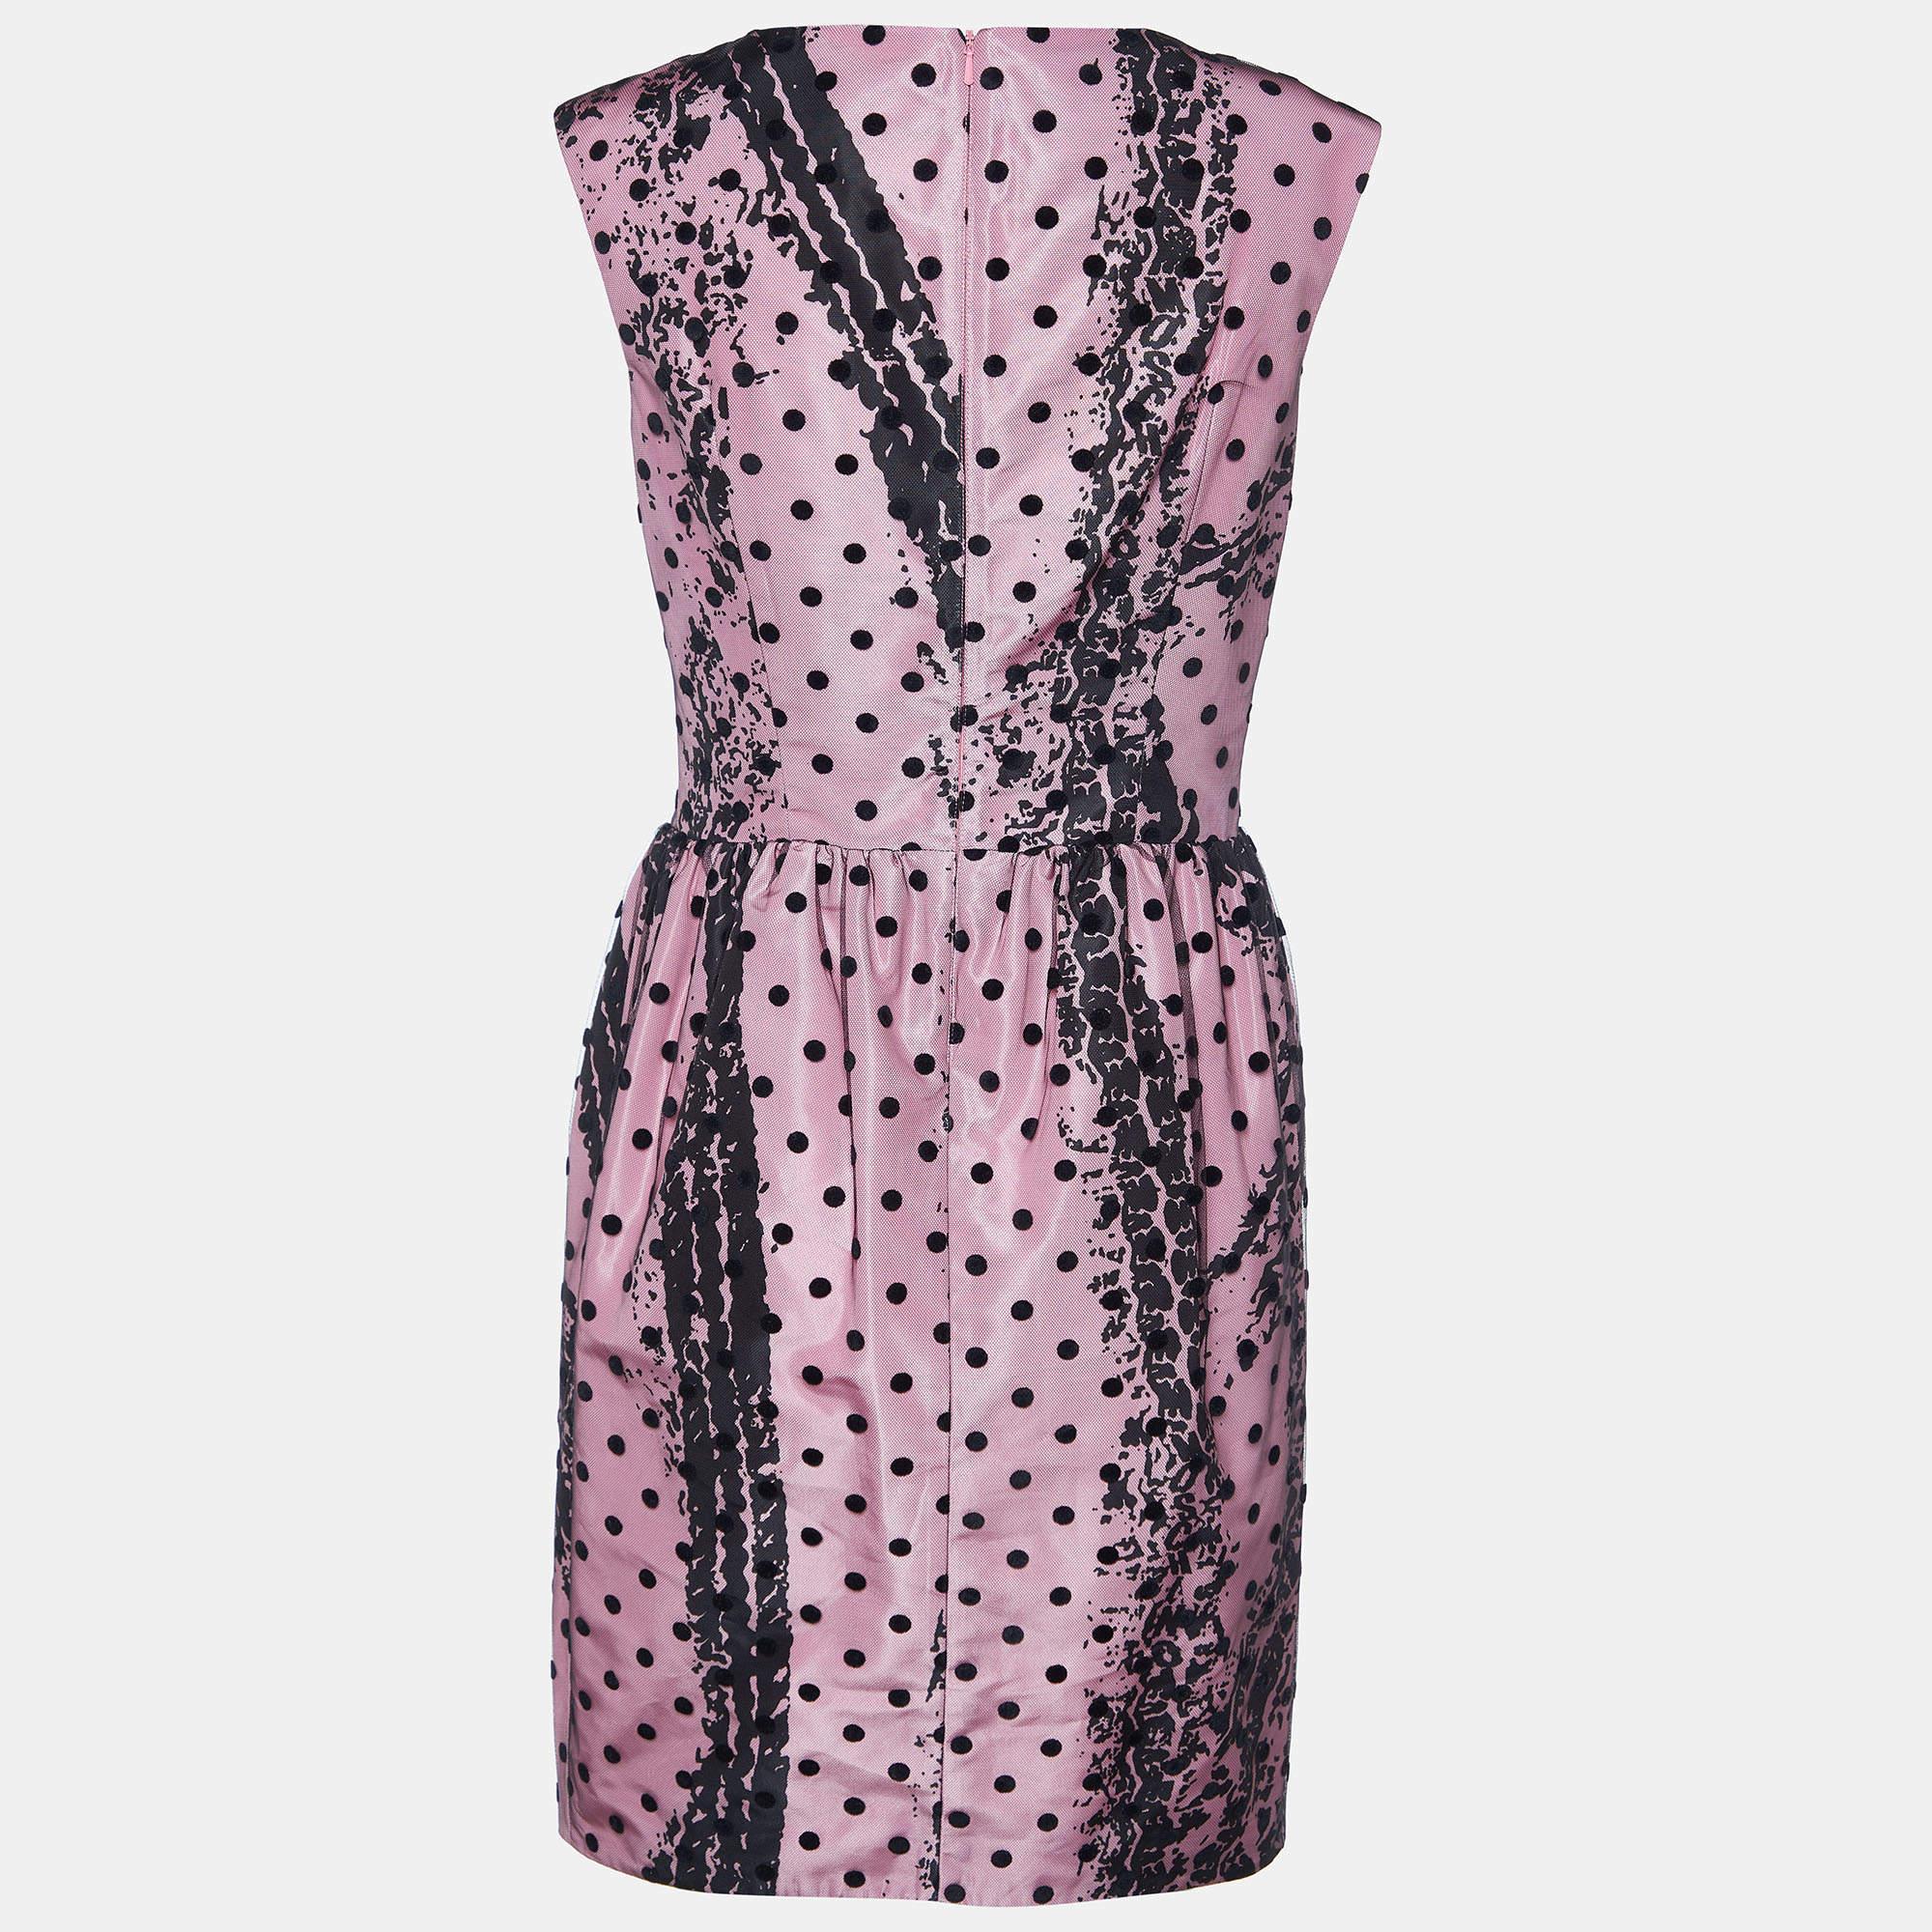 The Moschino Couture dress is a striking blend of elegance and playfulness. It features a satin sheath silhouette adorned with intricate prints, accented with polka dot tulle on all over for a whimsical touch, creating a chic and sophisticated